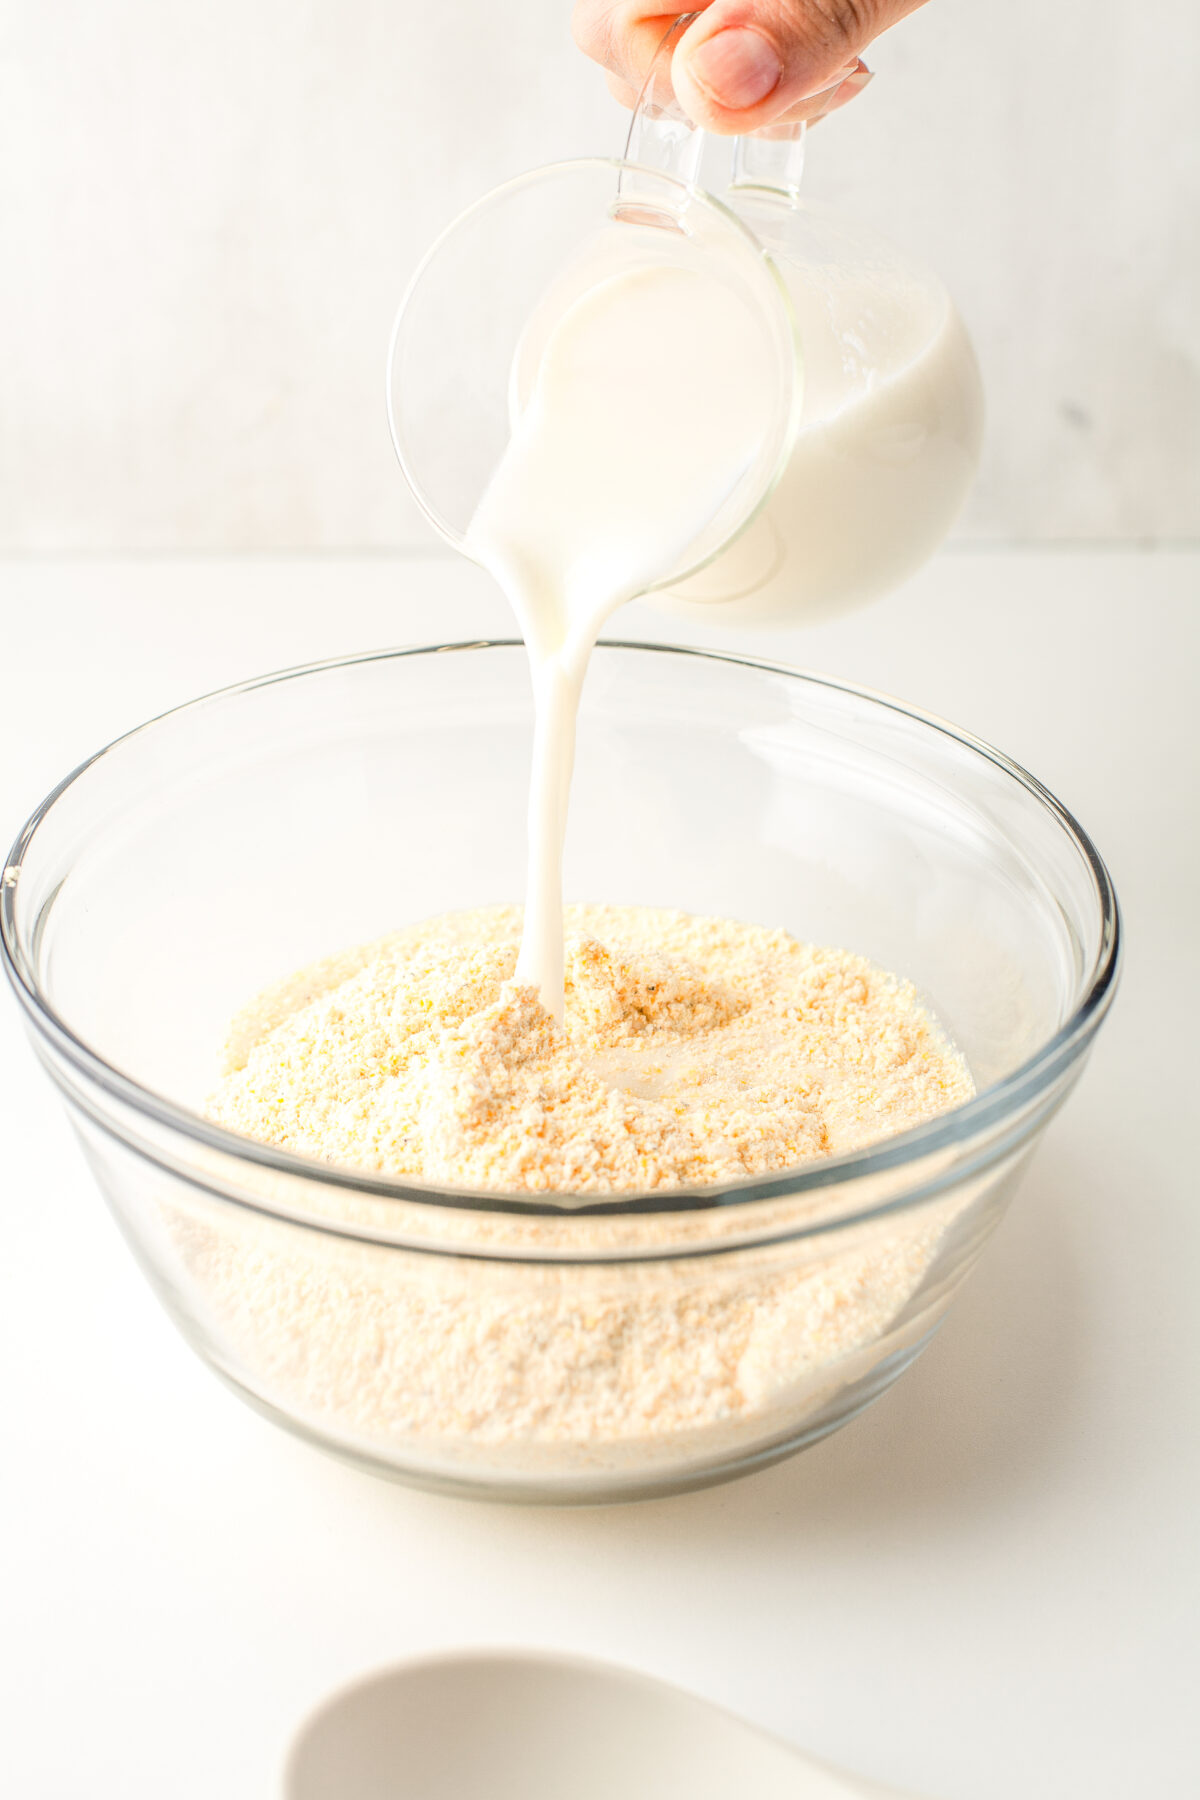 Milk being poured into a glass bowl with cornmeal in it.